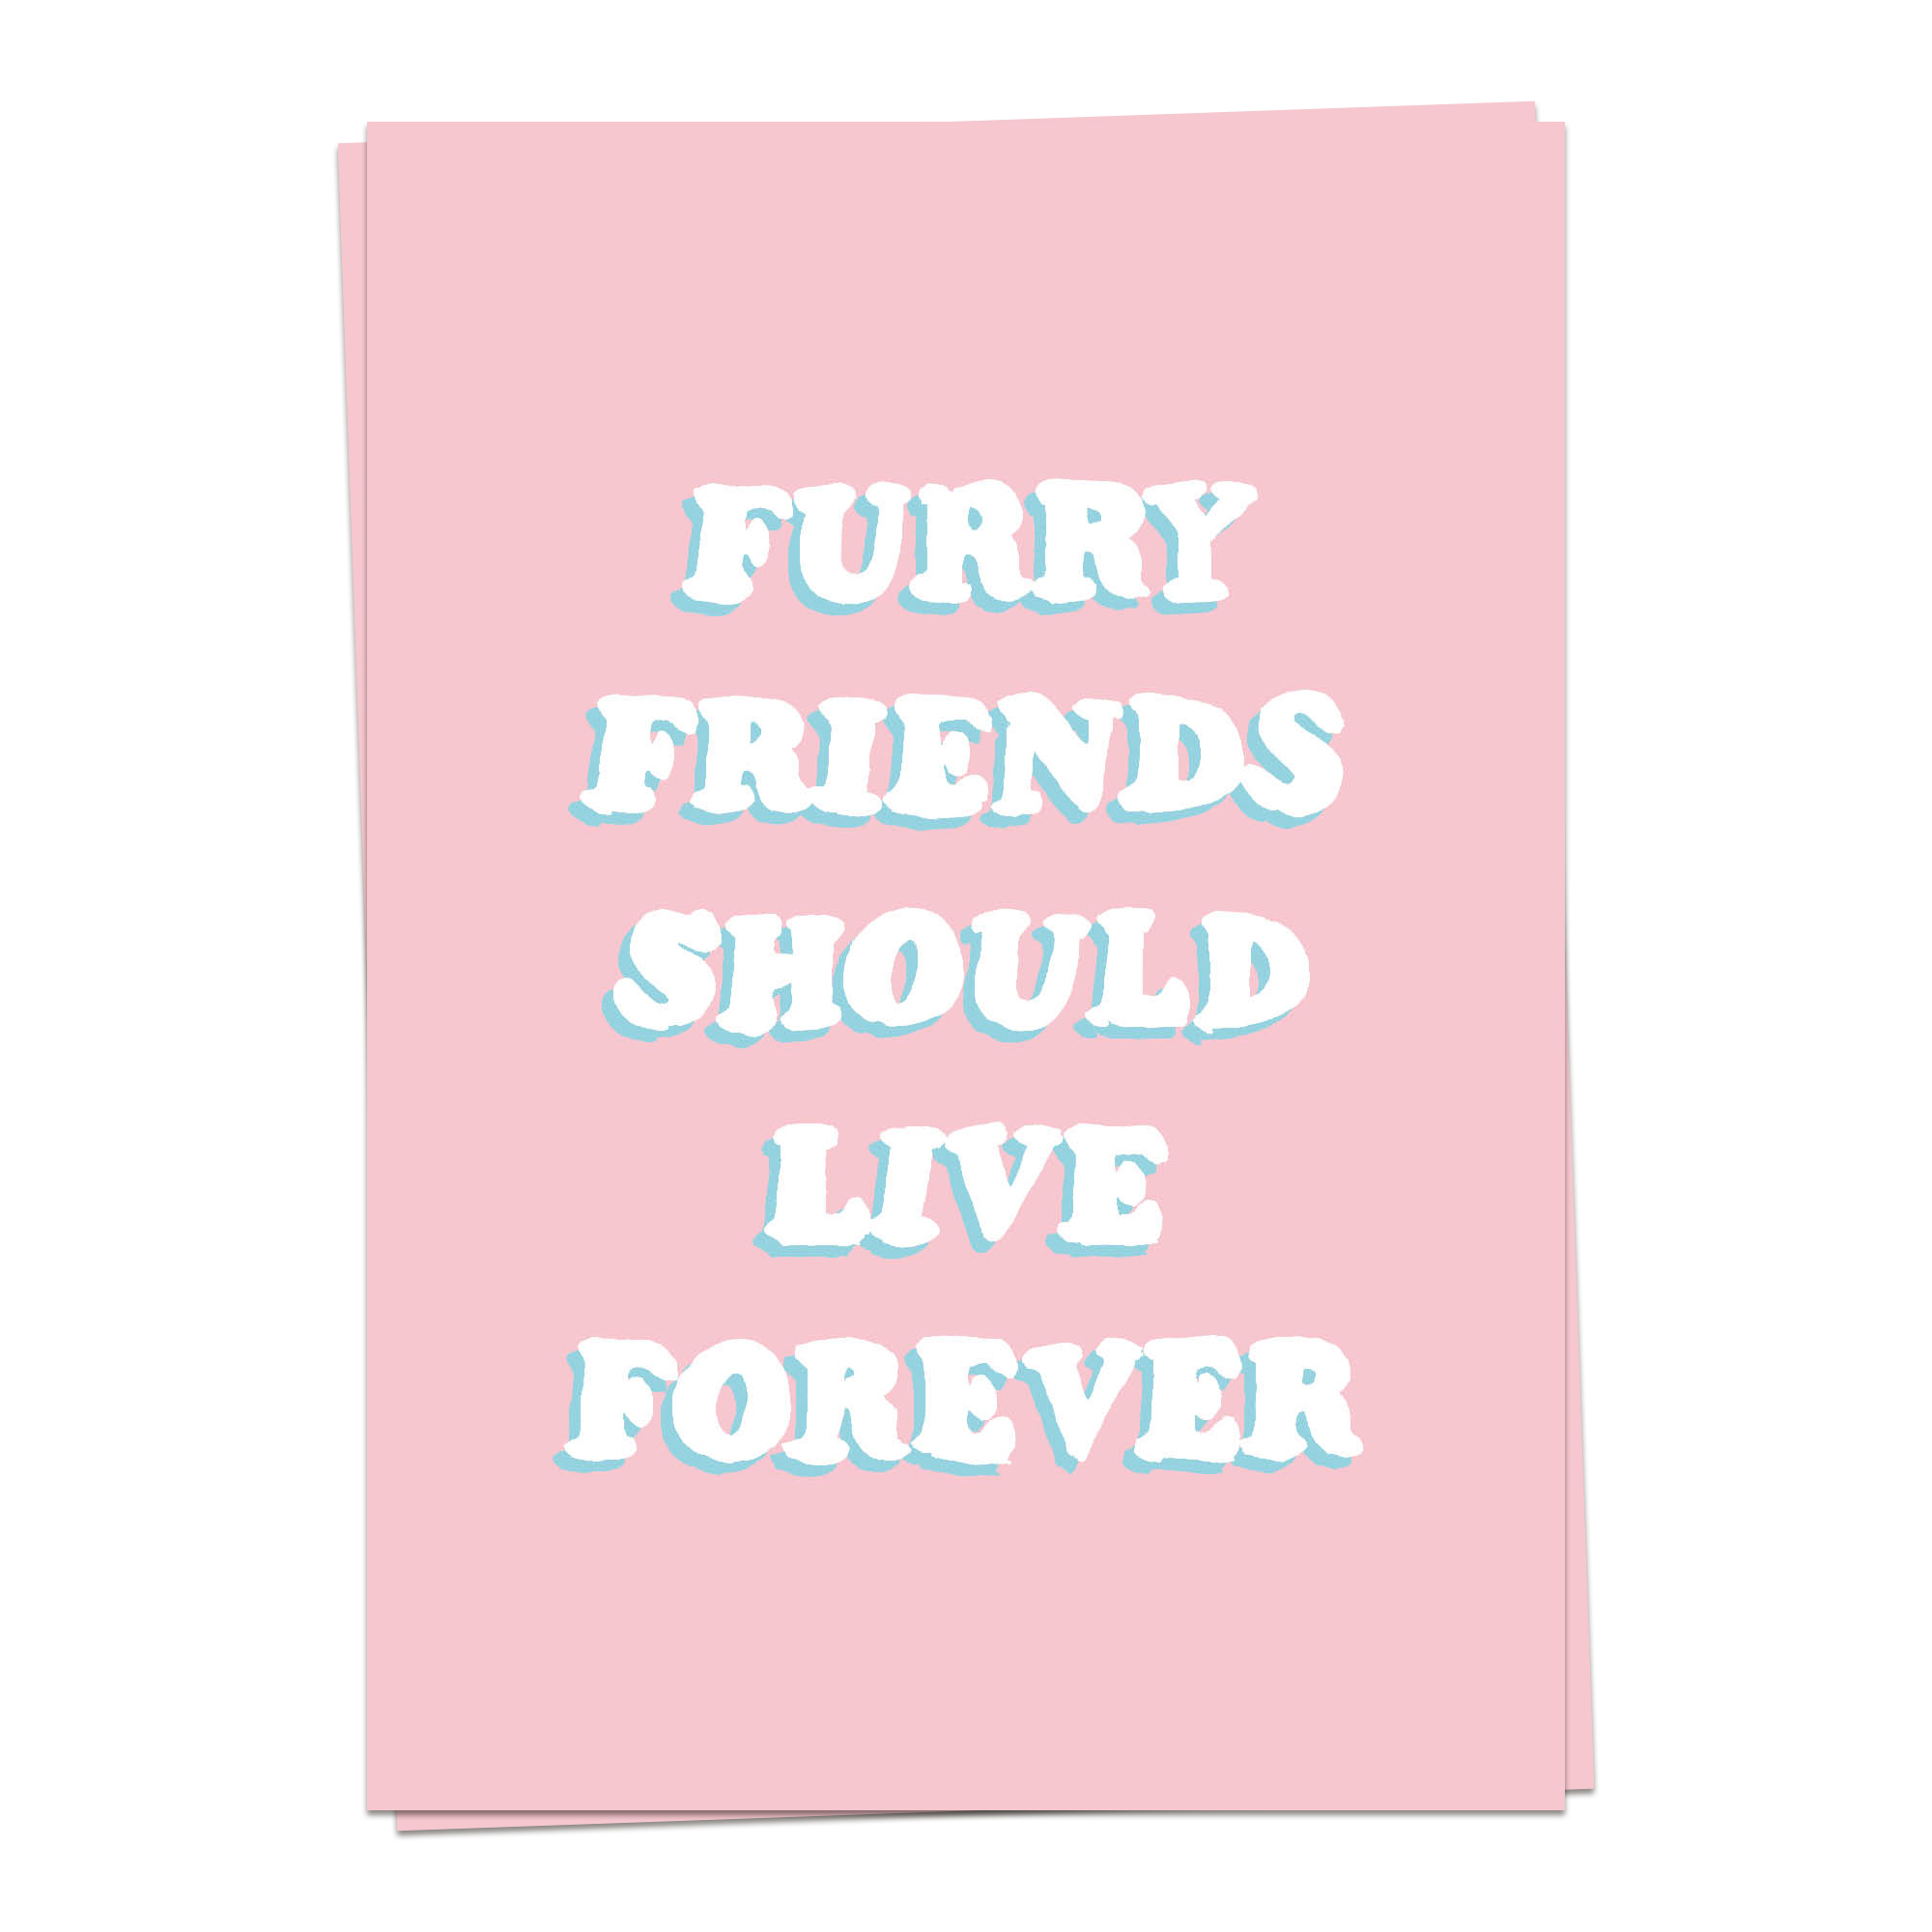 Support – Furry friends